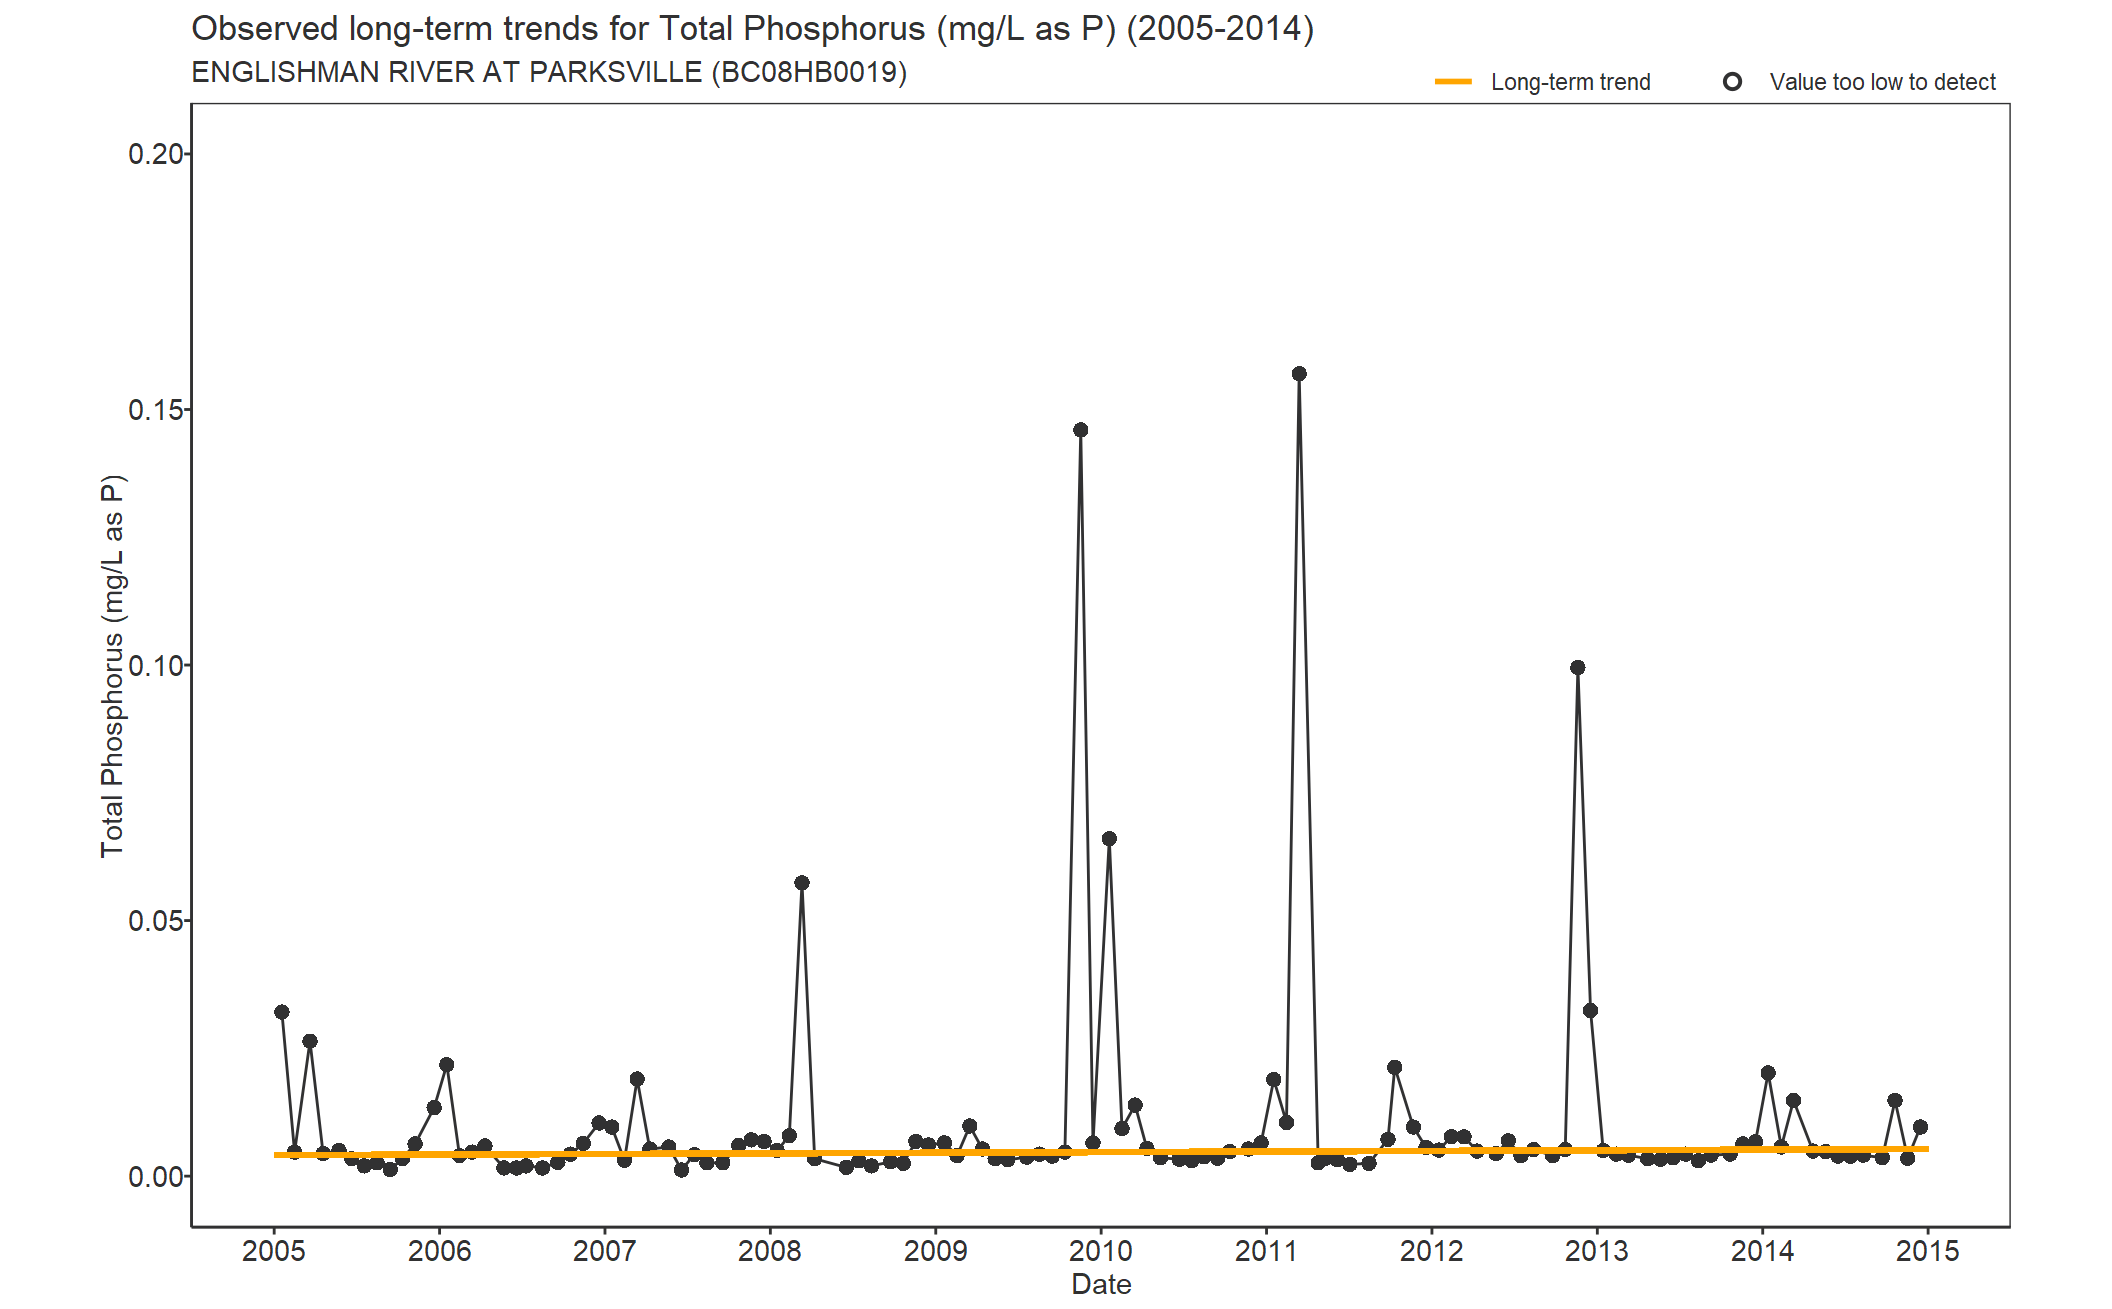 Observed long-term trends for Total Phosphorus (2005-2014)